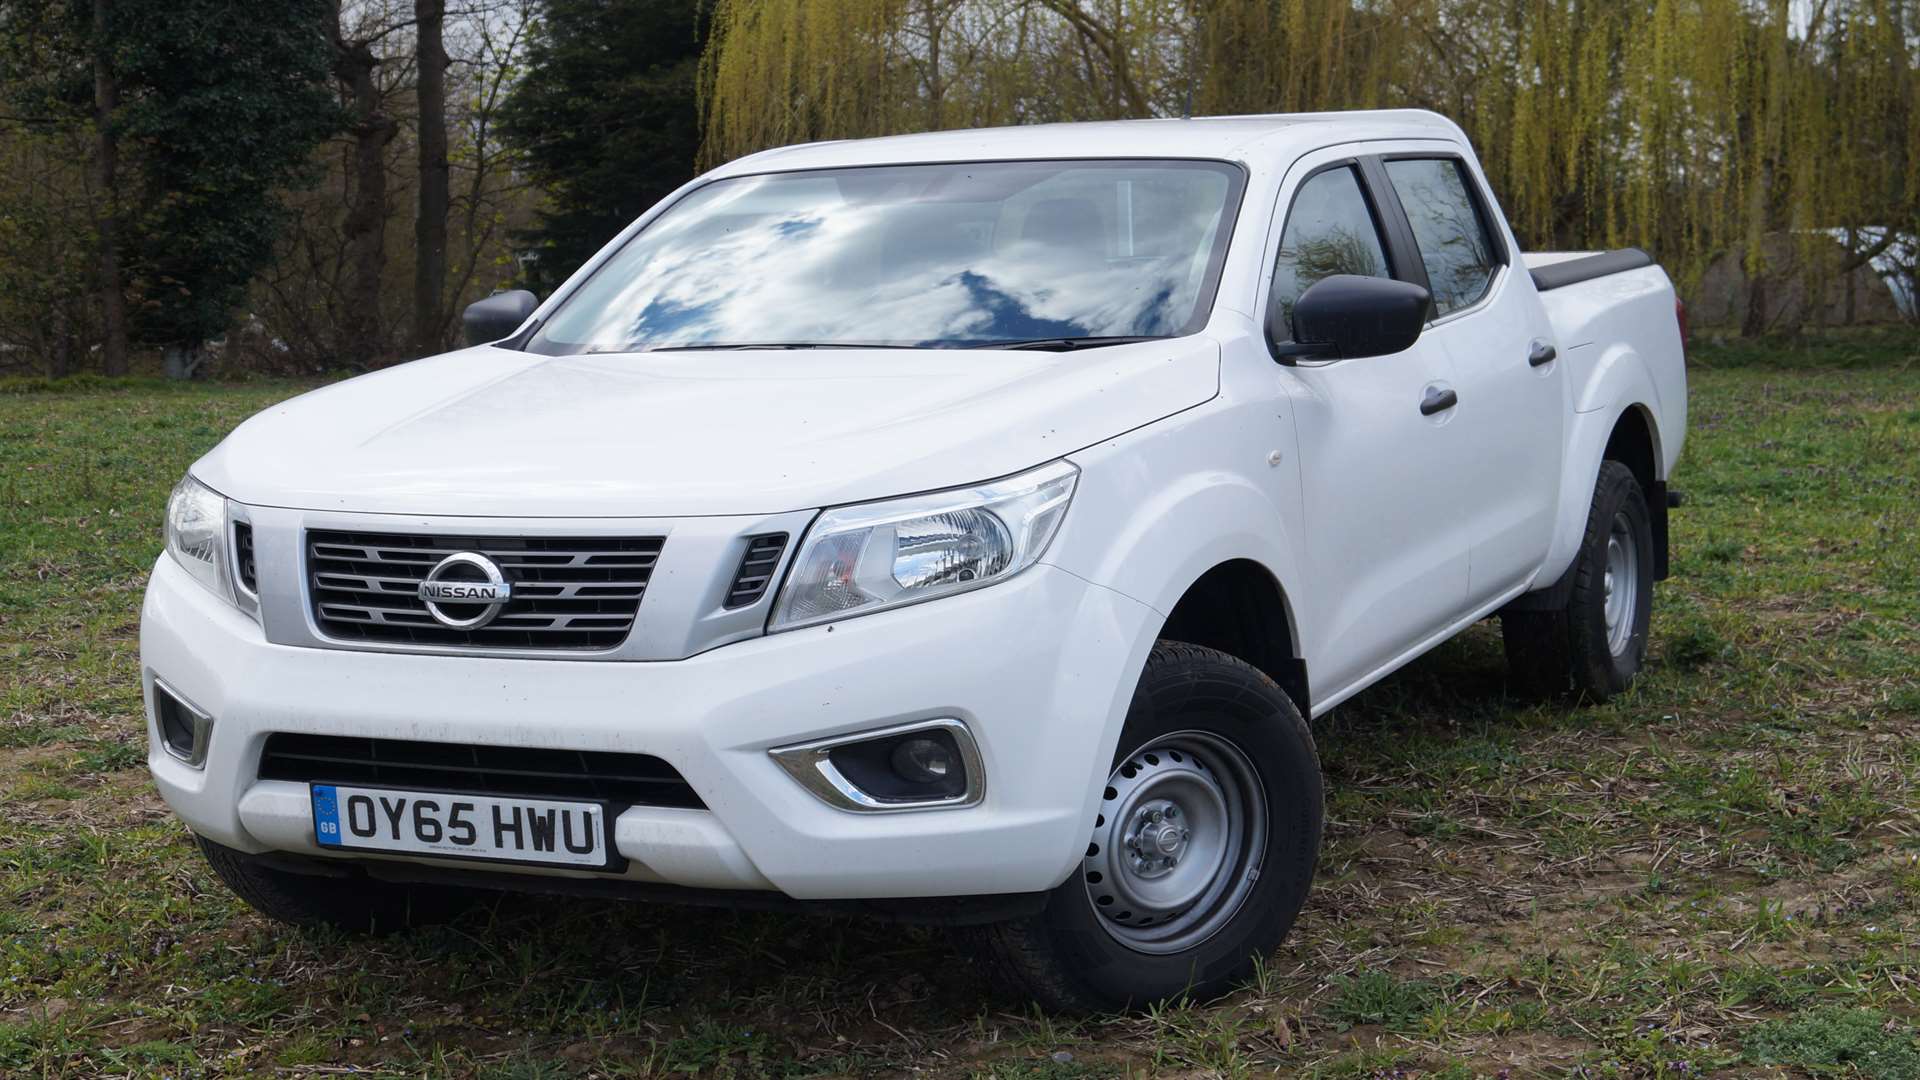 It might not look it, but the Navara is actually a lot of fun